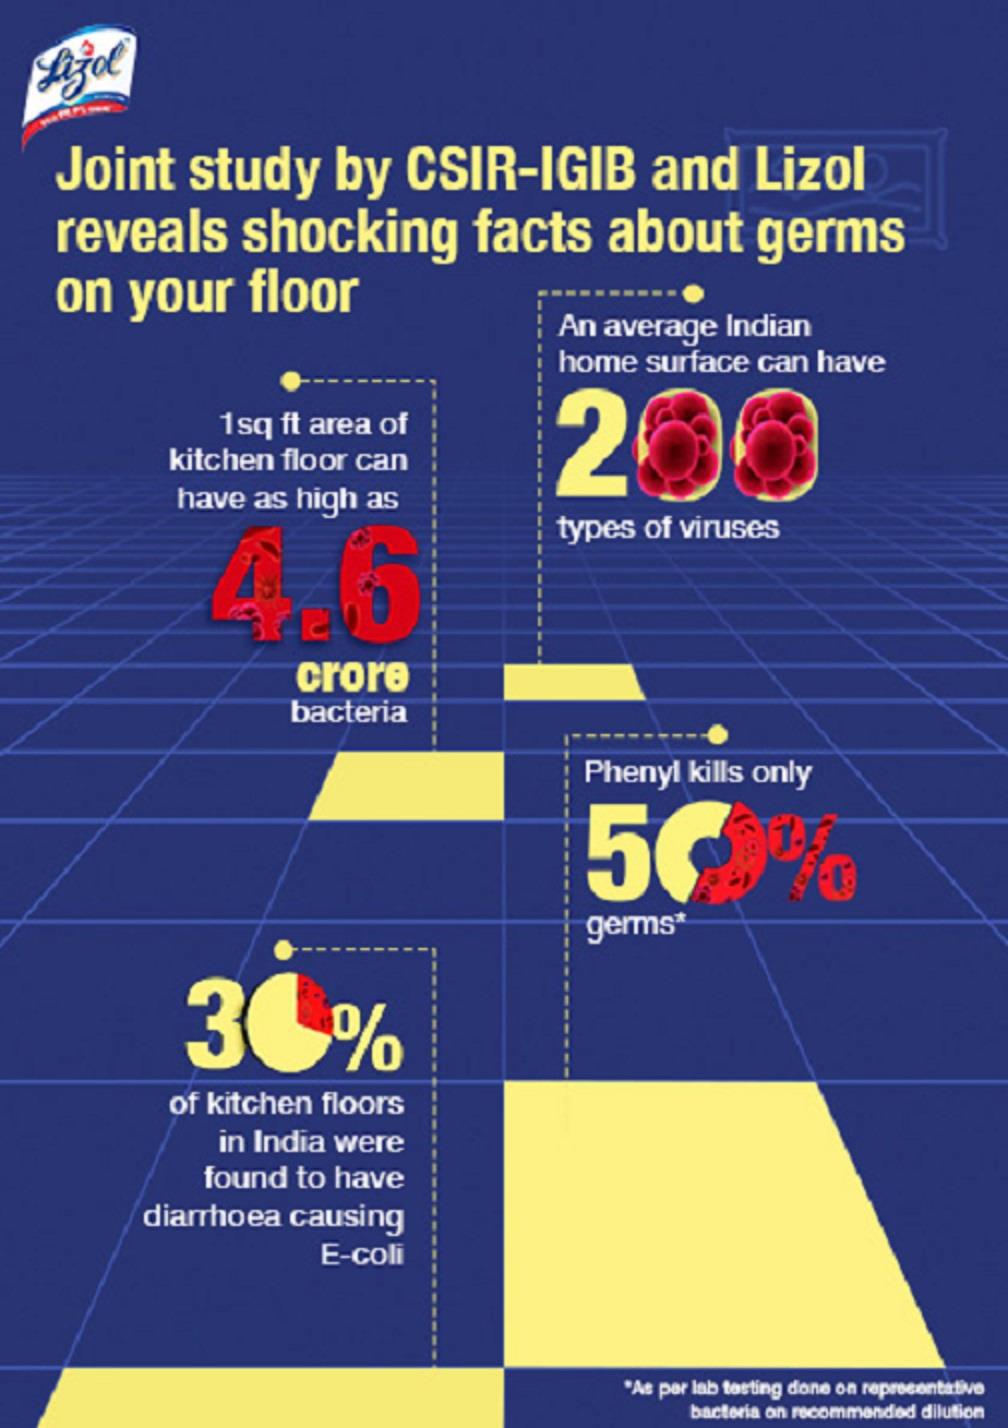 CSIR-IGIB And Lizol Study Reveals Only 1 Square Foot Of The Floor Can Harbour Lakhs Of Illness-Causing Germs